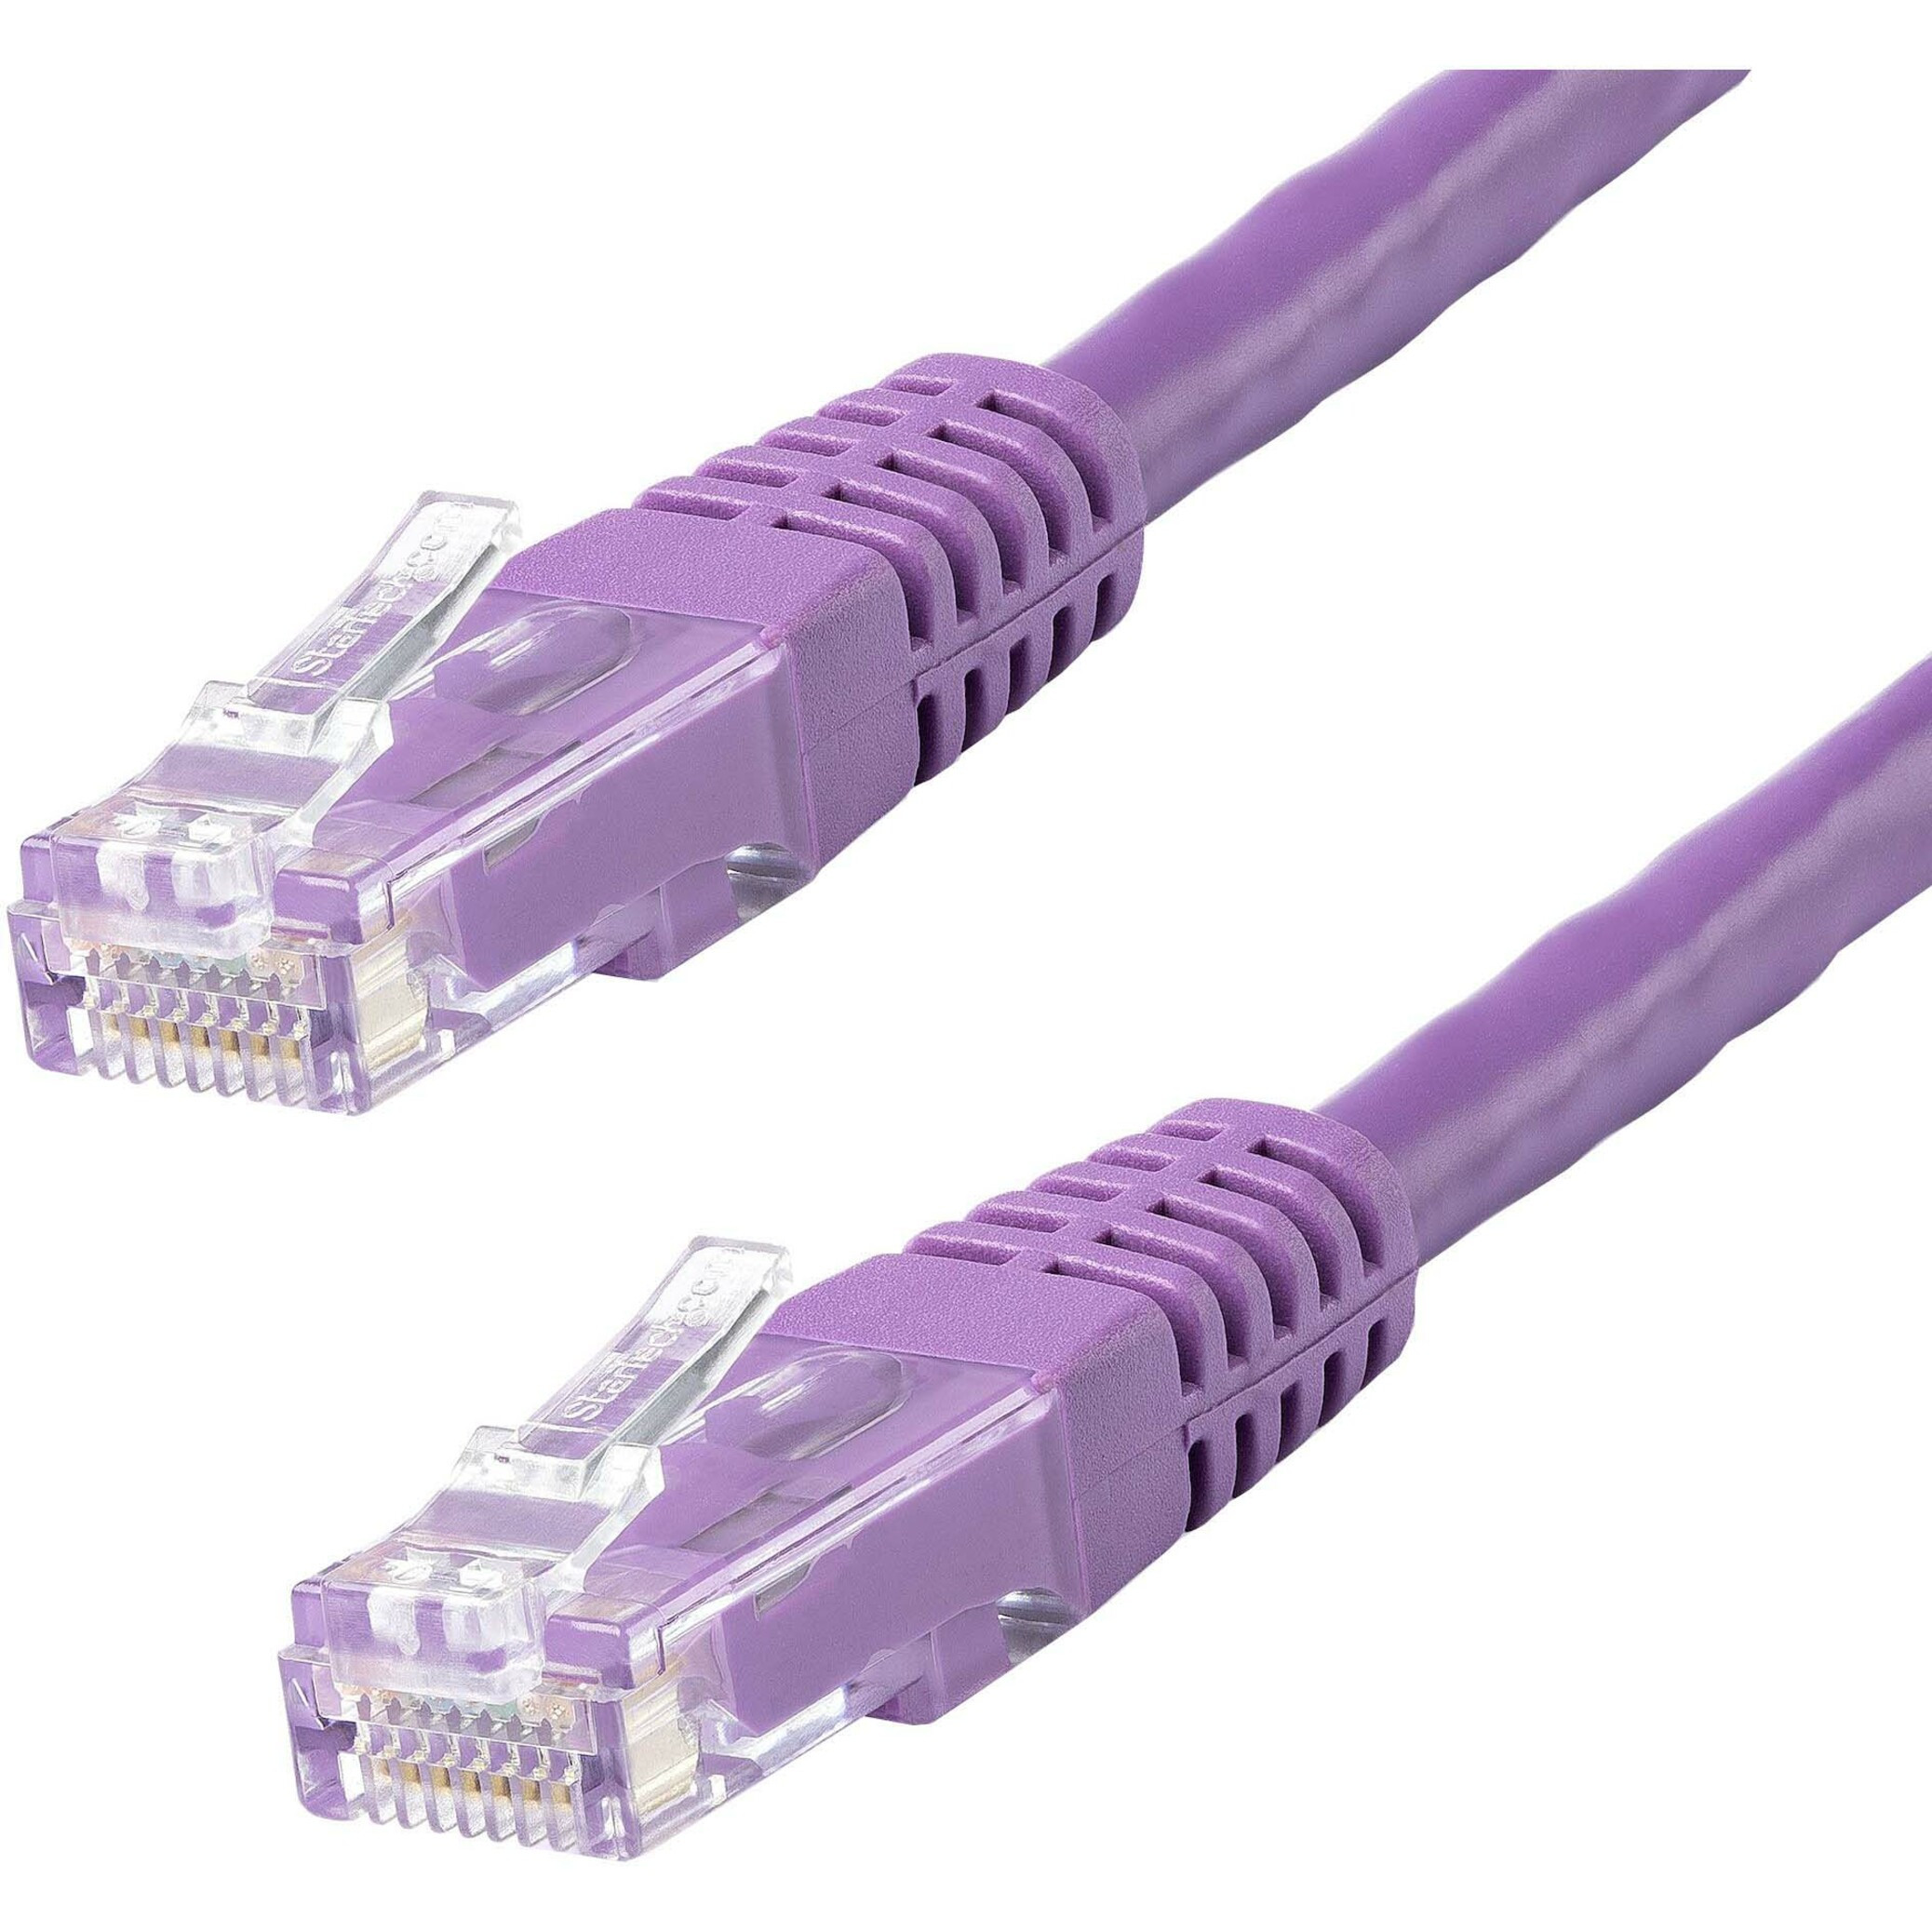 Startech .com 6ft CAT6 Ethernet CablePurple Molded Gigabit100W PoE UTP 650MHzCategory 6 Patch Cord UL Certified Wiring/TIA6ft Purp… C6PATCH6PL